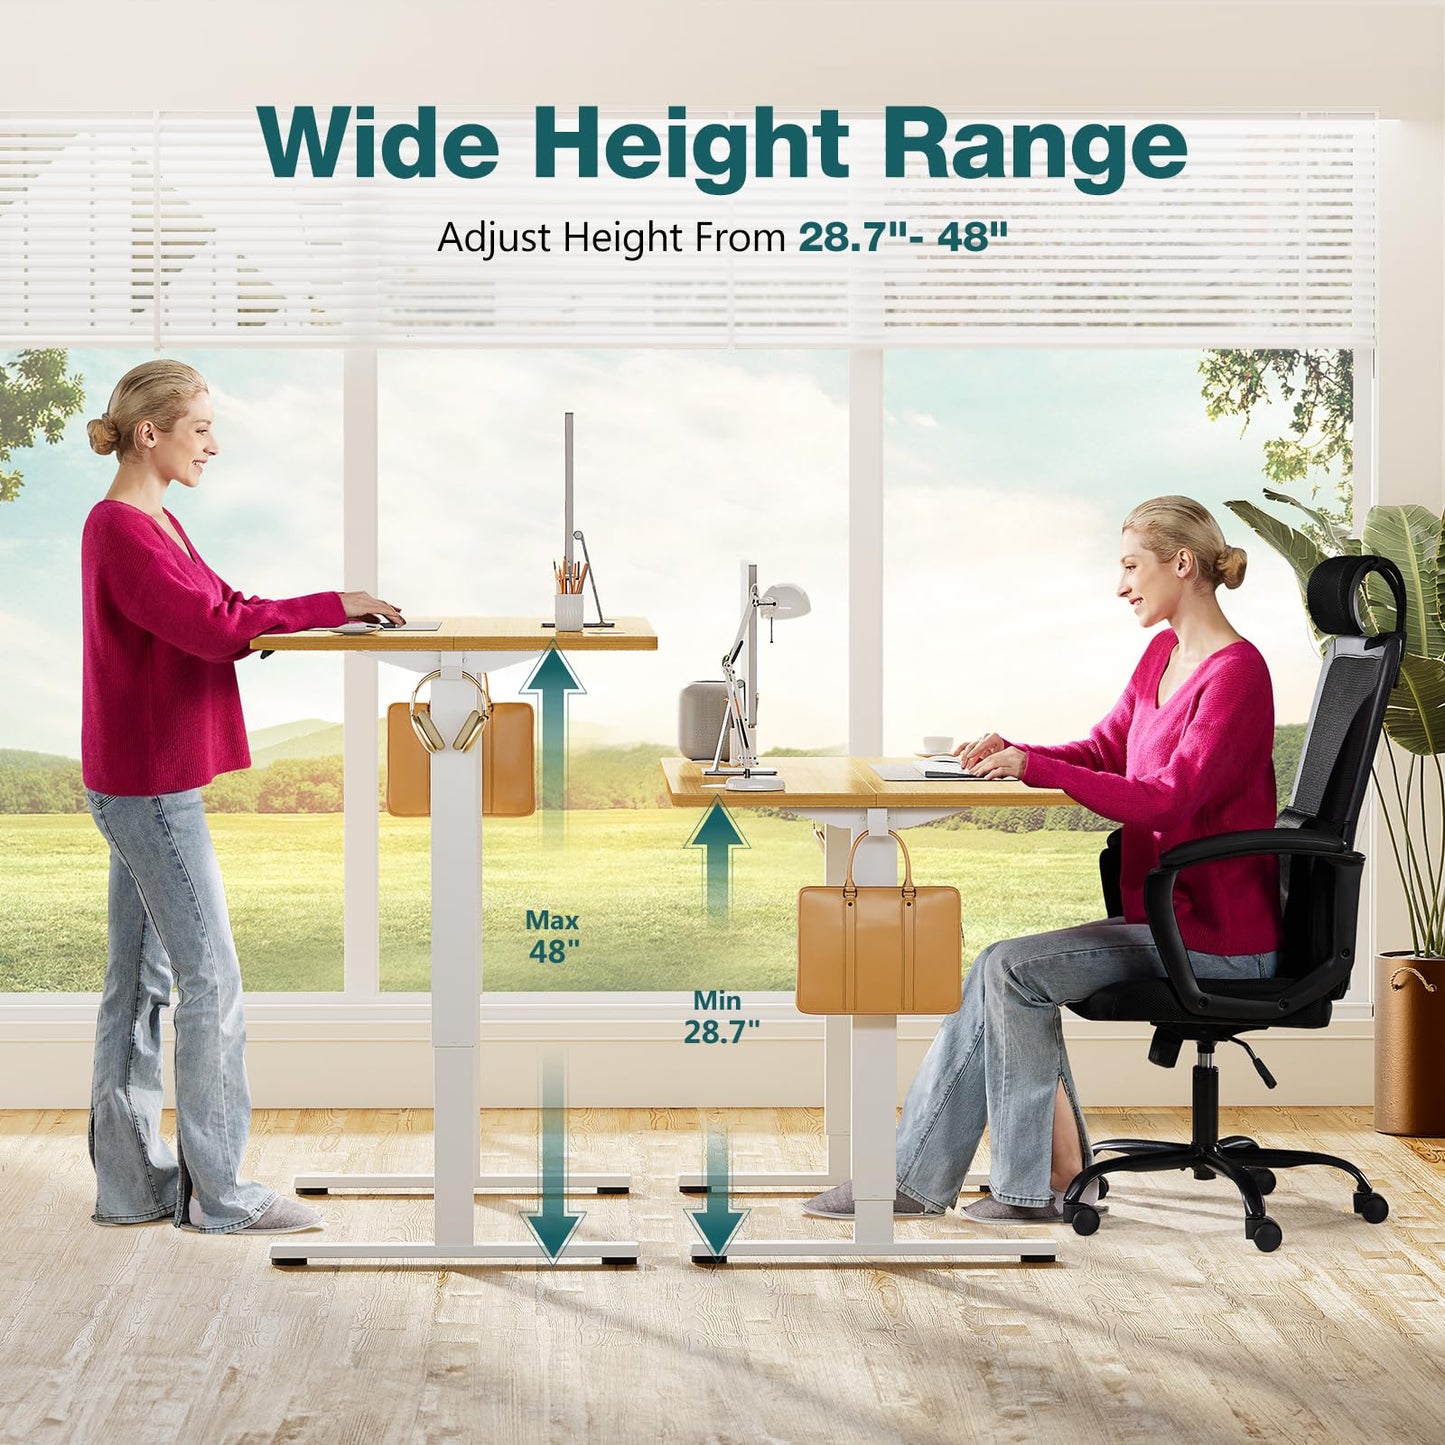 SMUG Standing Desk, Adjustable Height Electric Sit Stand Up Down Computer Table, 40x24 Inch Ergonomic Rising Desks for Work Office Home, Modern Lift